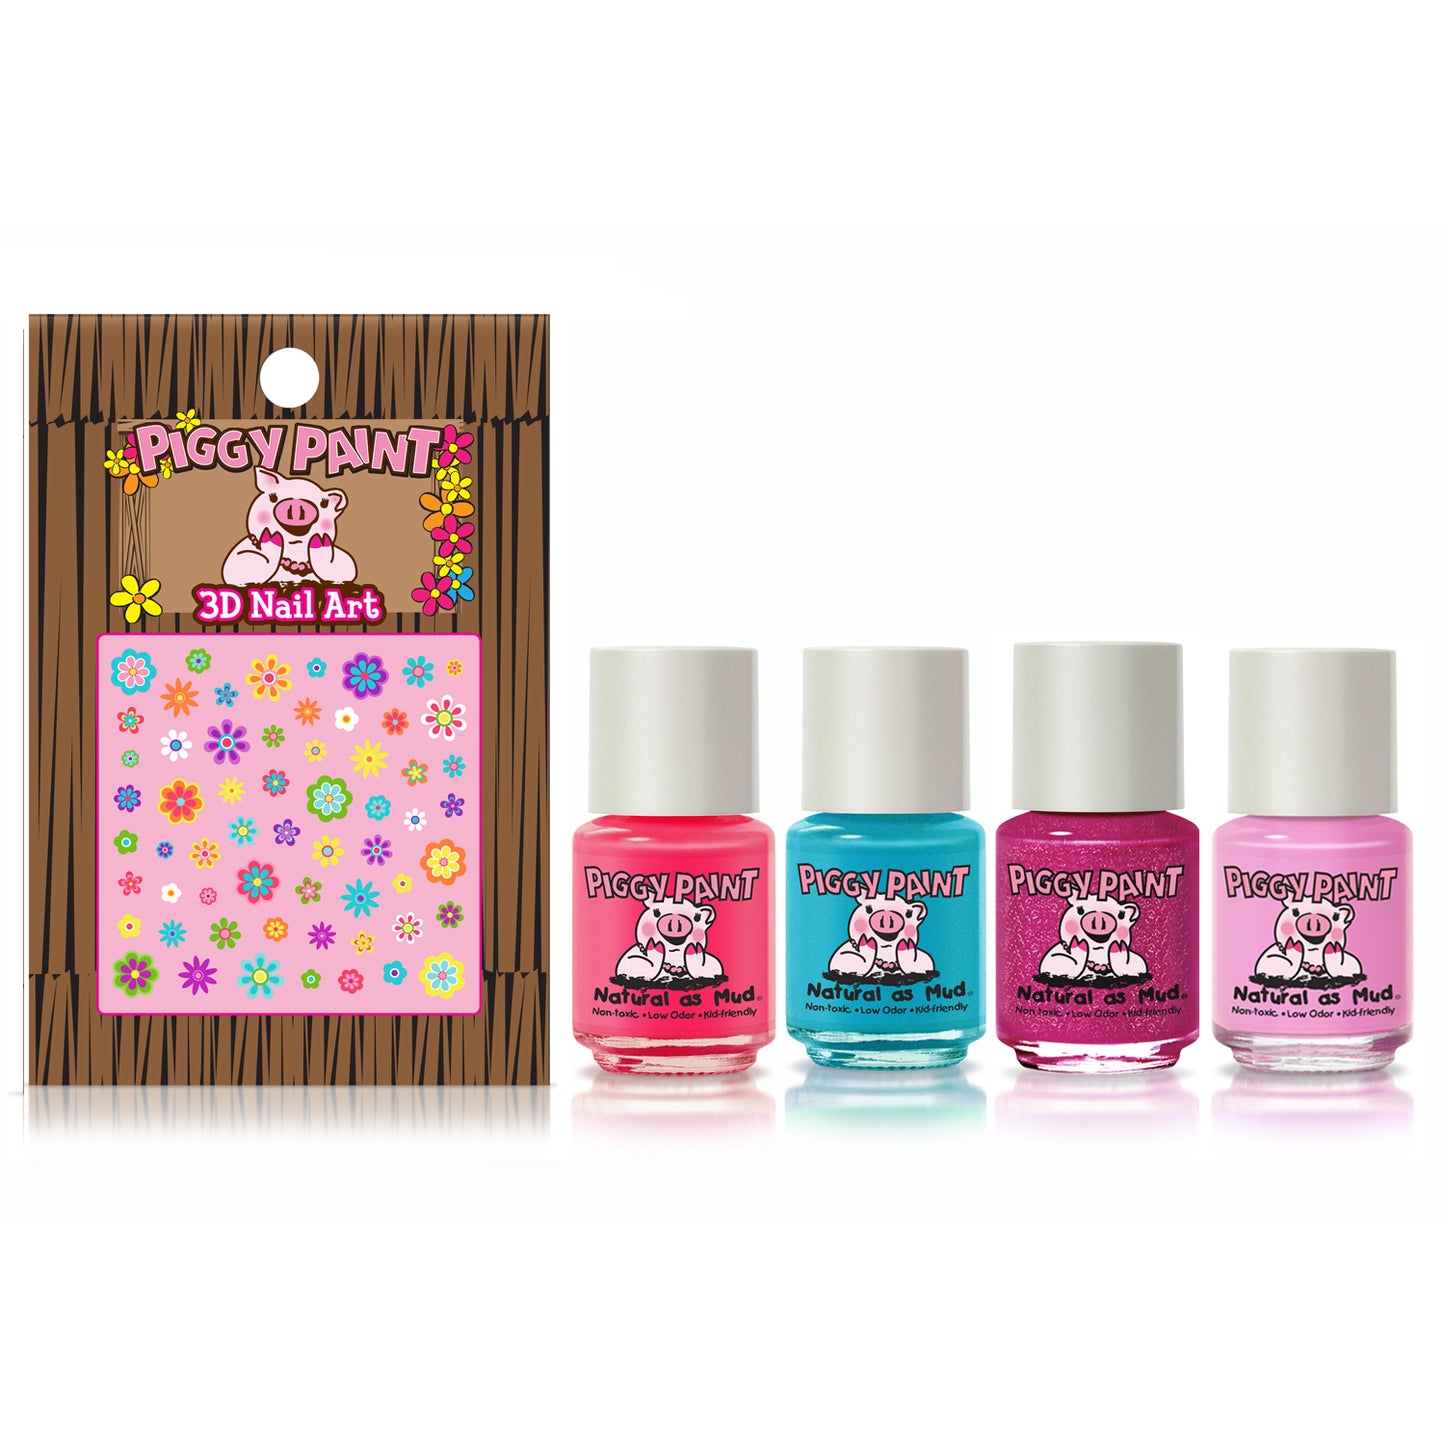 Party Heart-y Gift Set